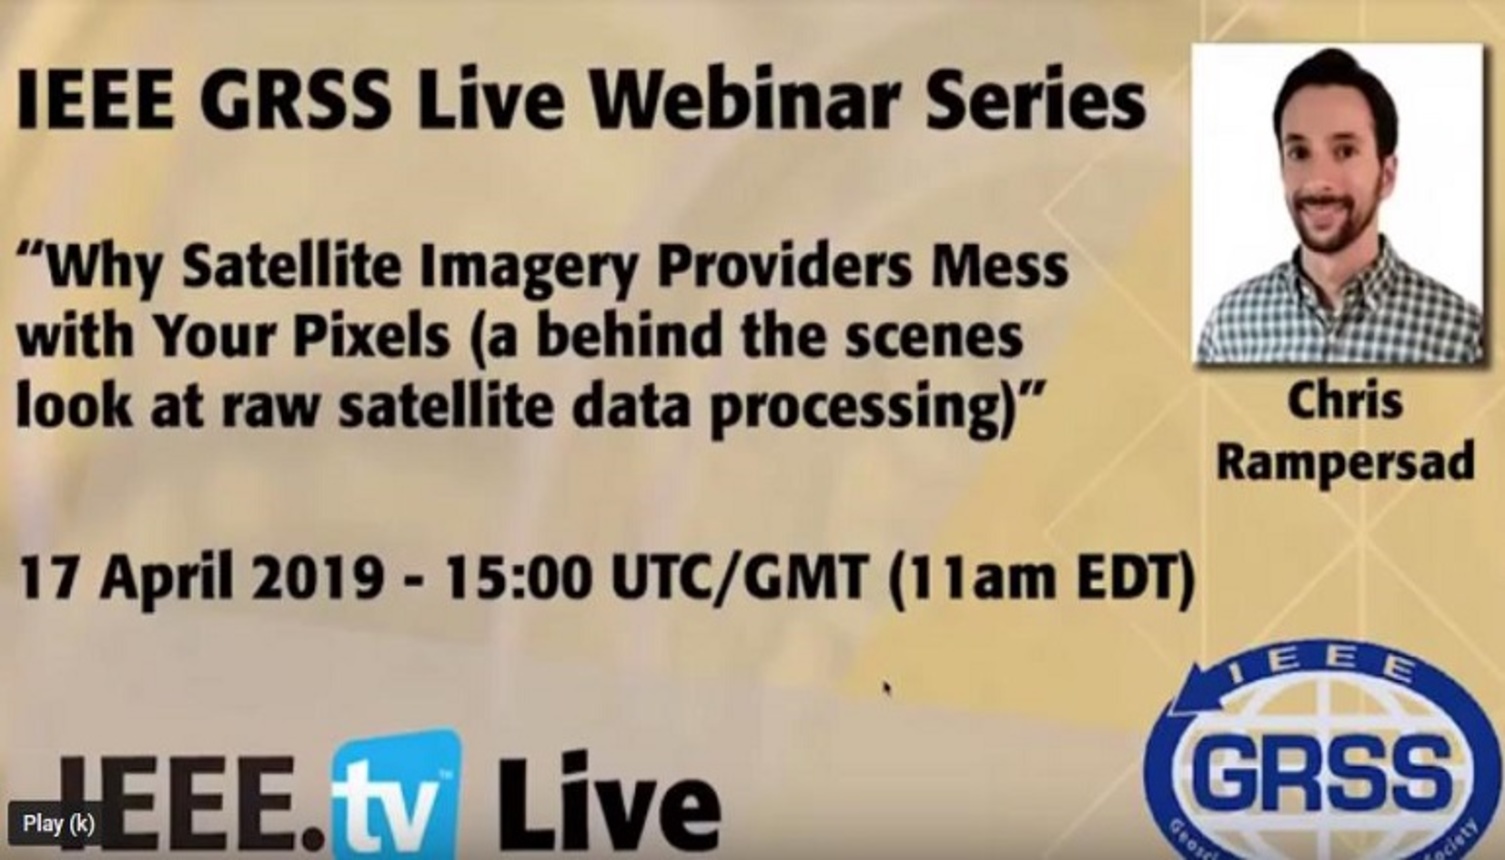 Why Satellite Imagery Providers Mess With Your Pixels, a Behind the Scenes Look at Raw Satellite Data Processing